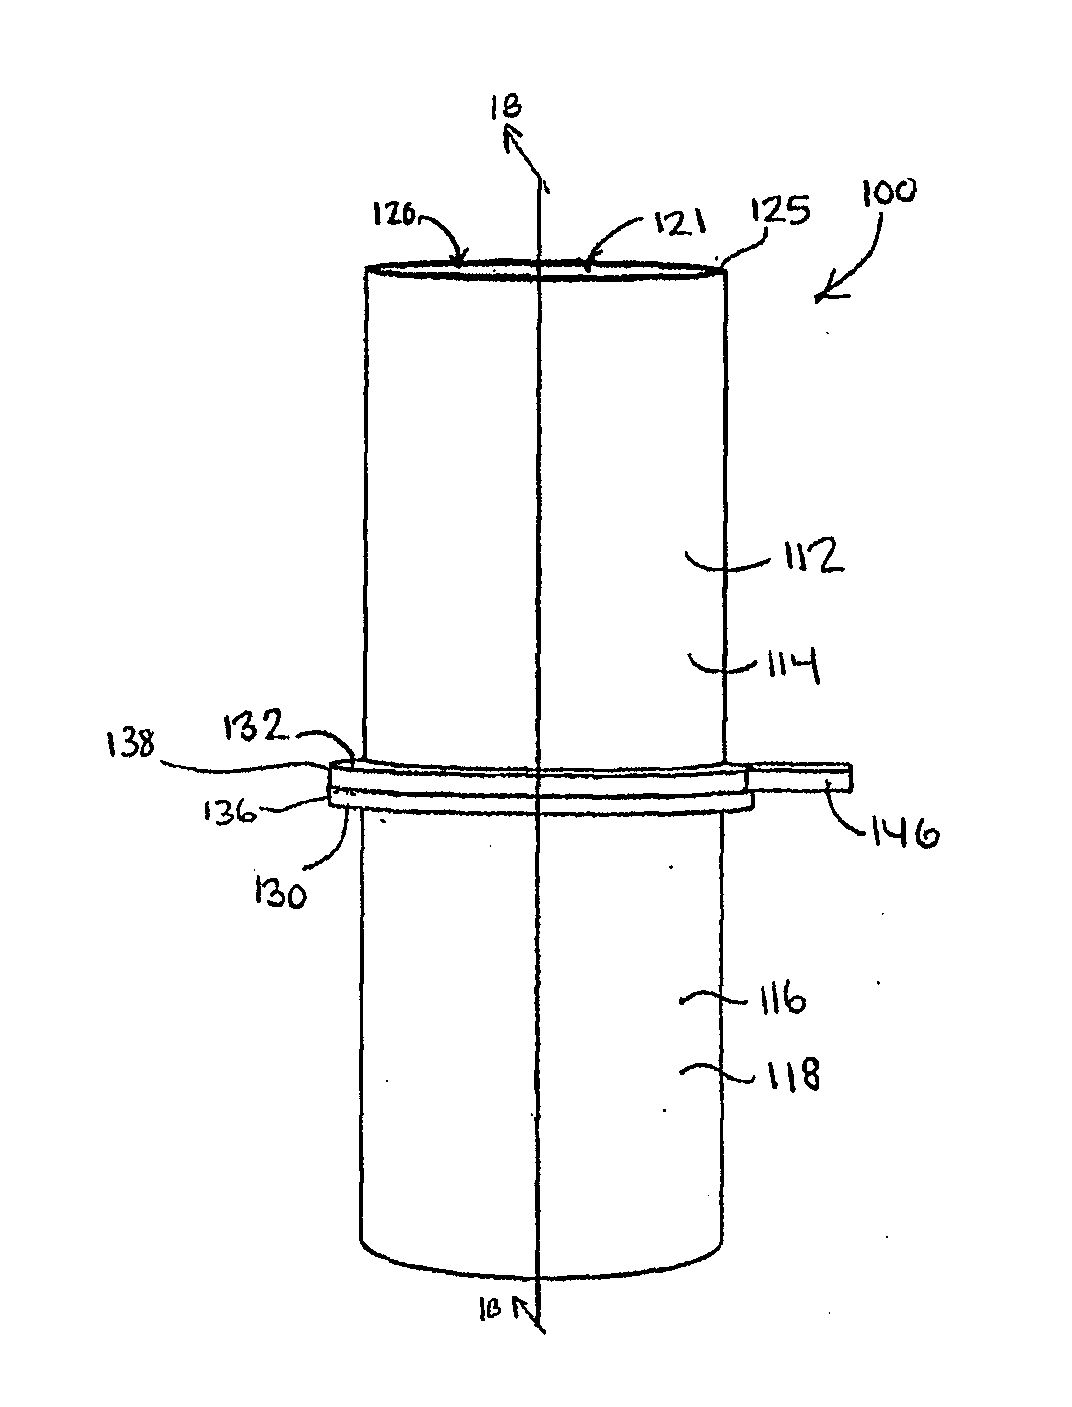 Filter apparatus and filter plate system